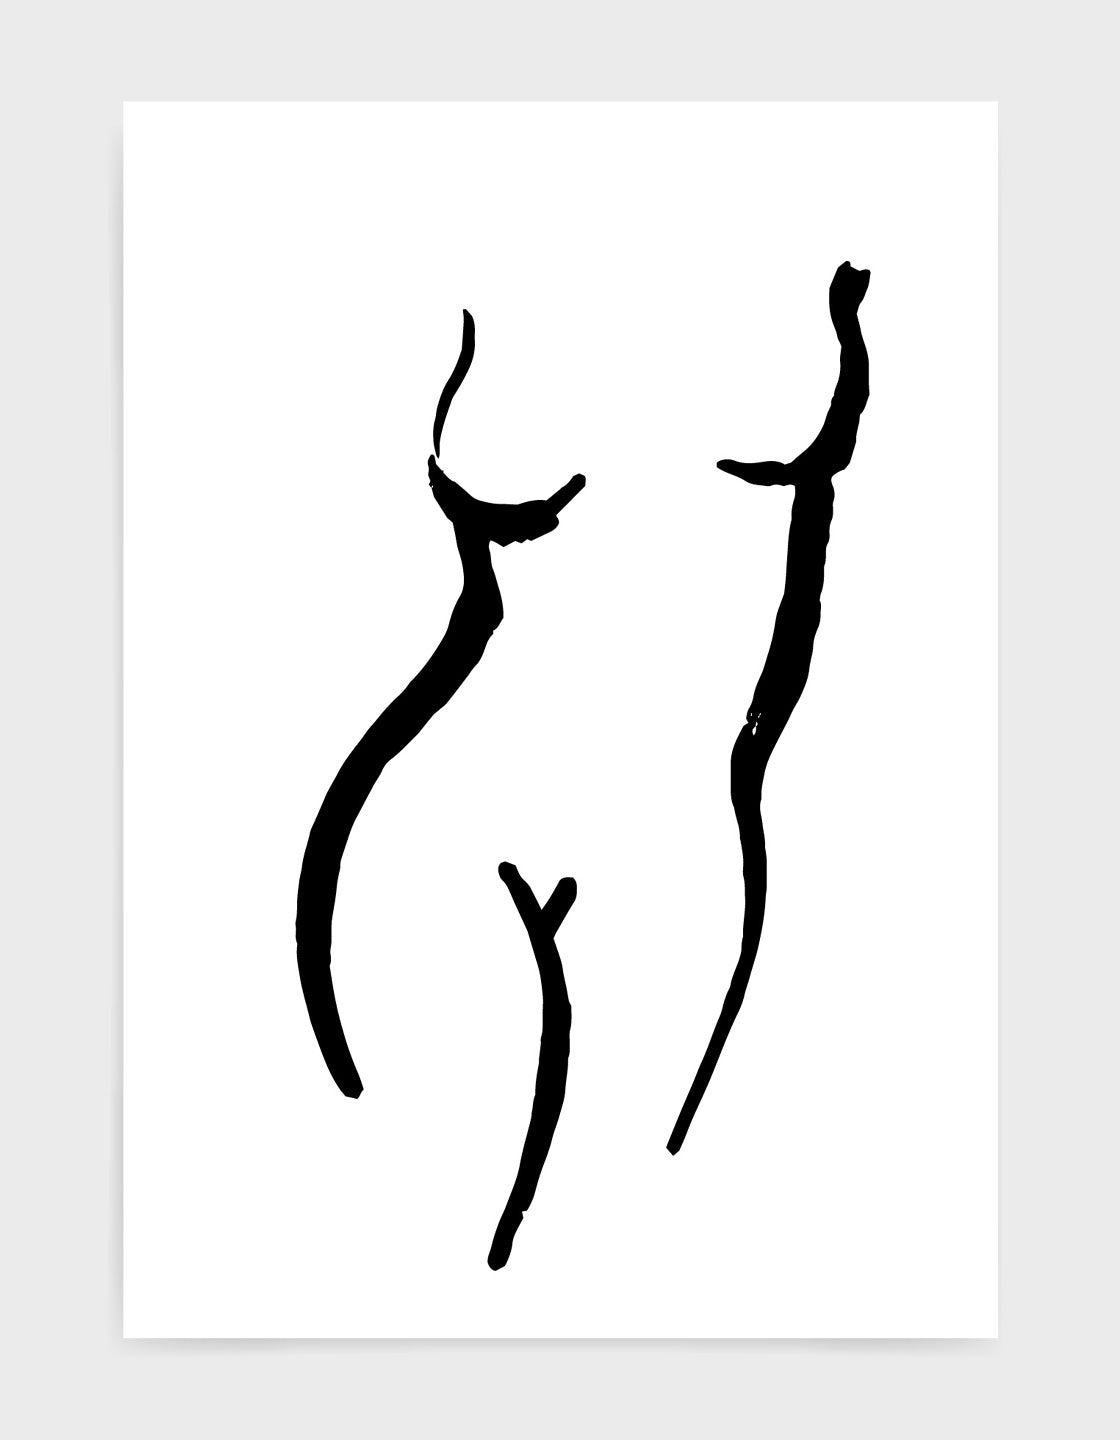 simple minimal black line drawing of a woman's torso against a white background